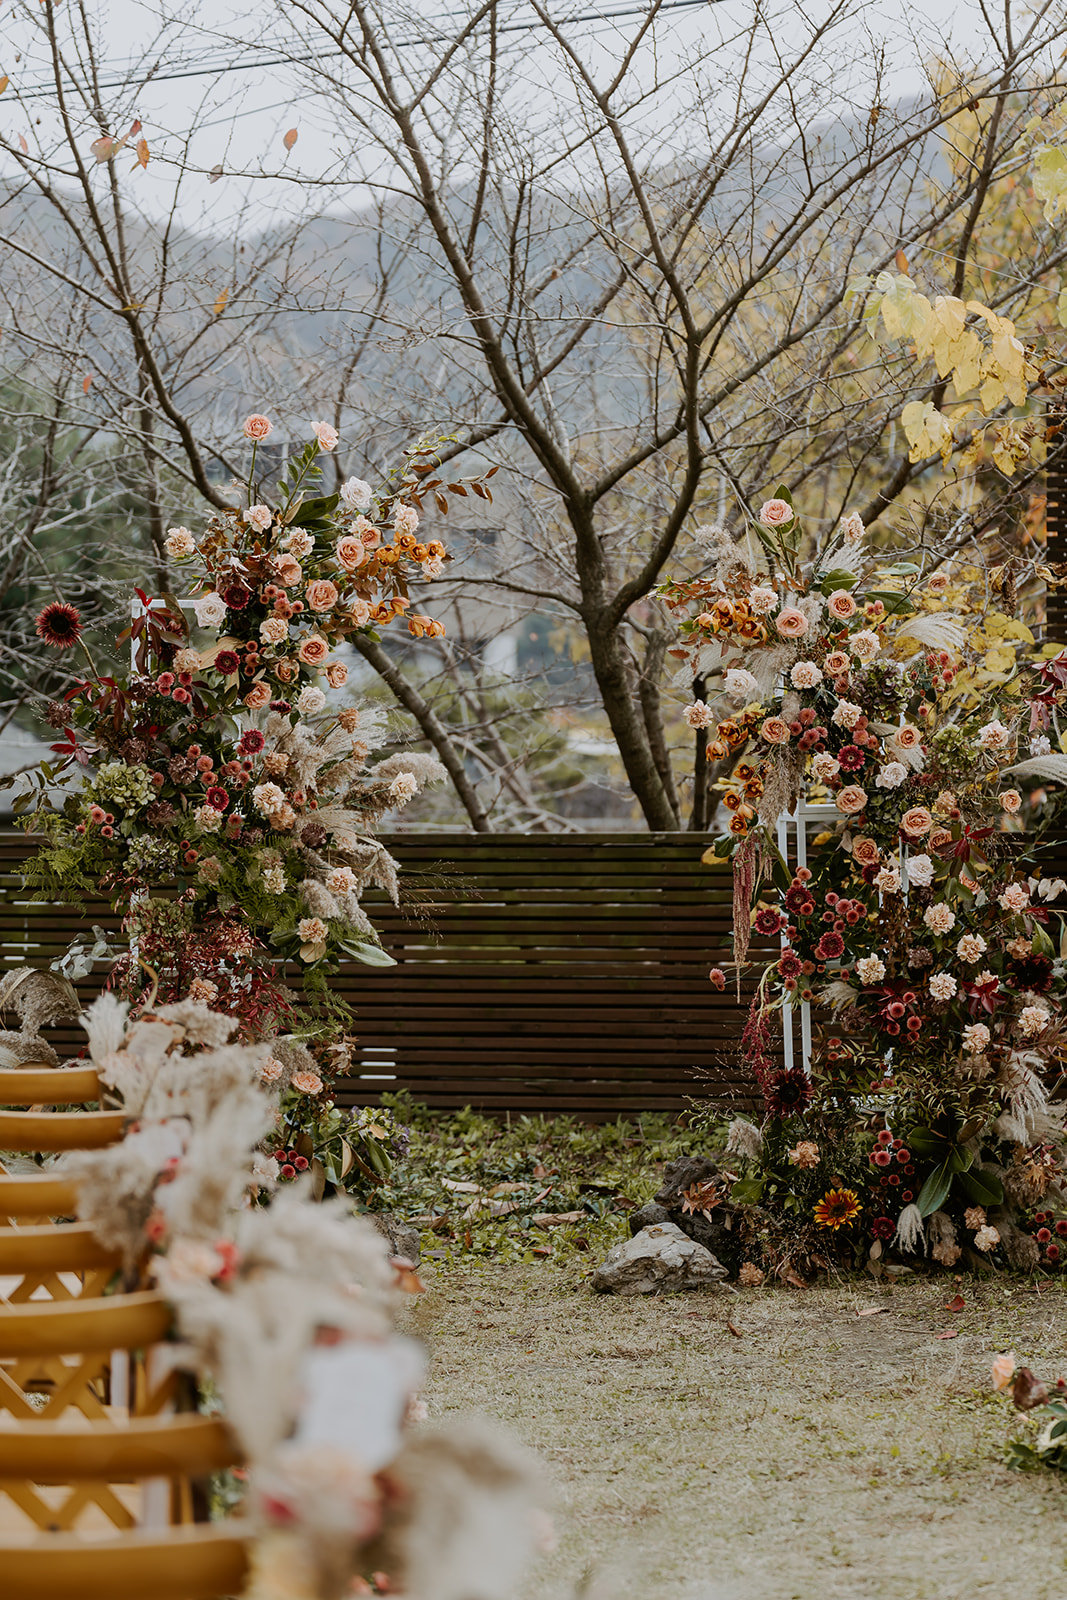 Two large floral arches adorn an outdoor wedding aisle, set against a natural backdrop with autumn foliage and a rustic 